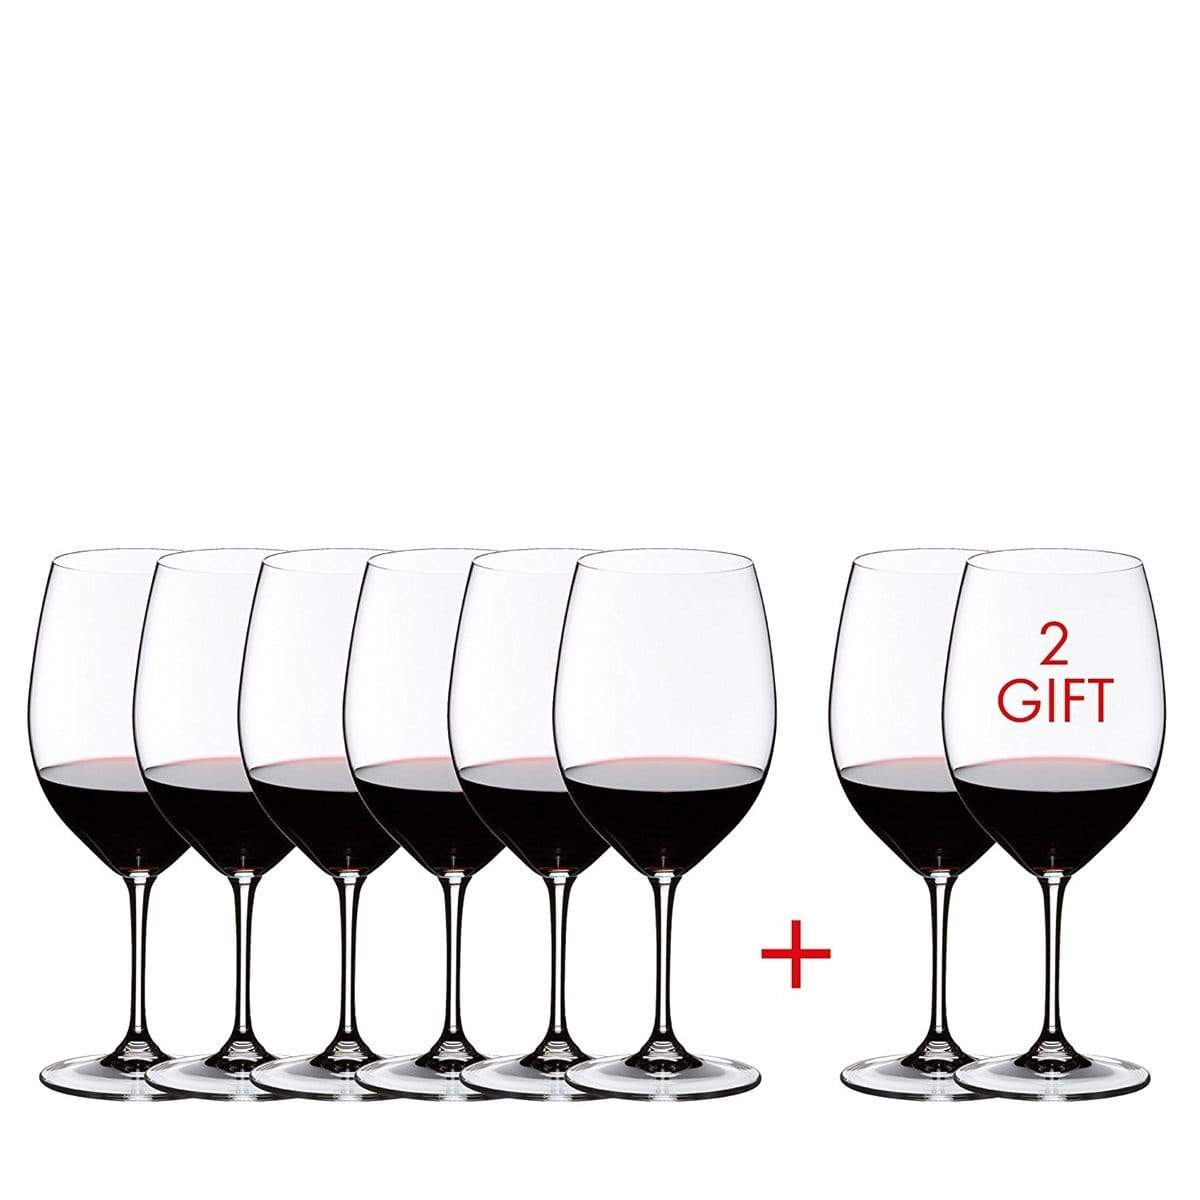 Riedel 'O' Buy 8 Pay 6 Cabernet Stemless Wine Glasses (Set of 8)